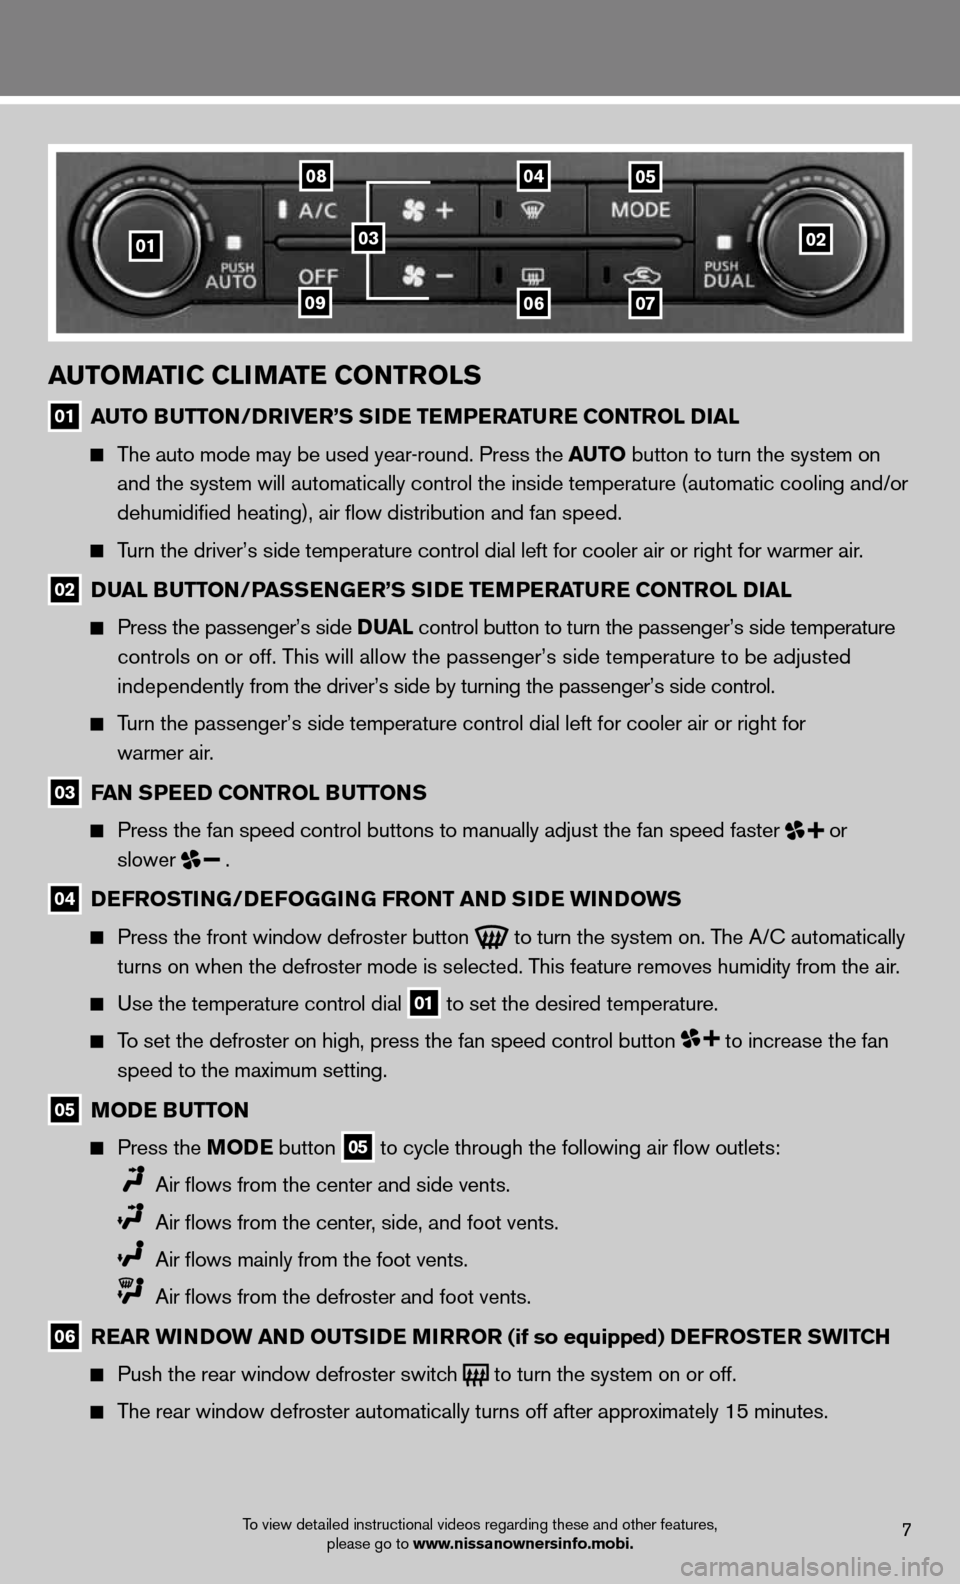 NISSAN ARMADA 2012 1.G Quick Reference Guide 7To view detailed instructional videos regarding these and other features, please go to www.nissanownersinfo.mobi.
01
0408
09
05
0607
0203
automatiC ClimatE Controls
01 auto B
utton/DrivE r’s si DE 